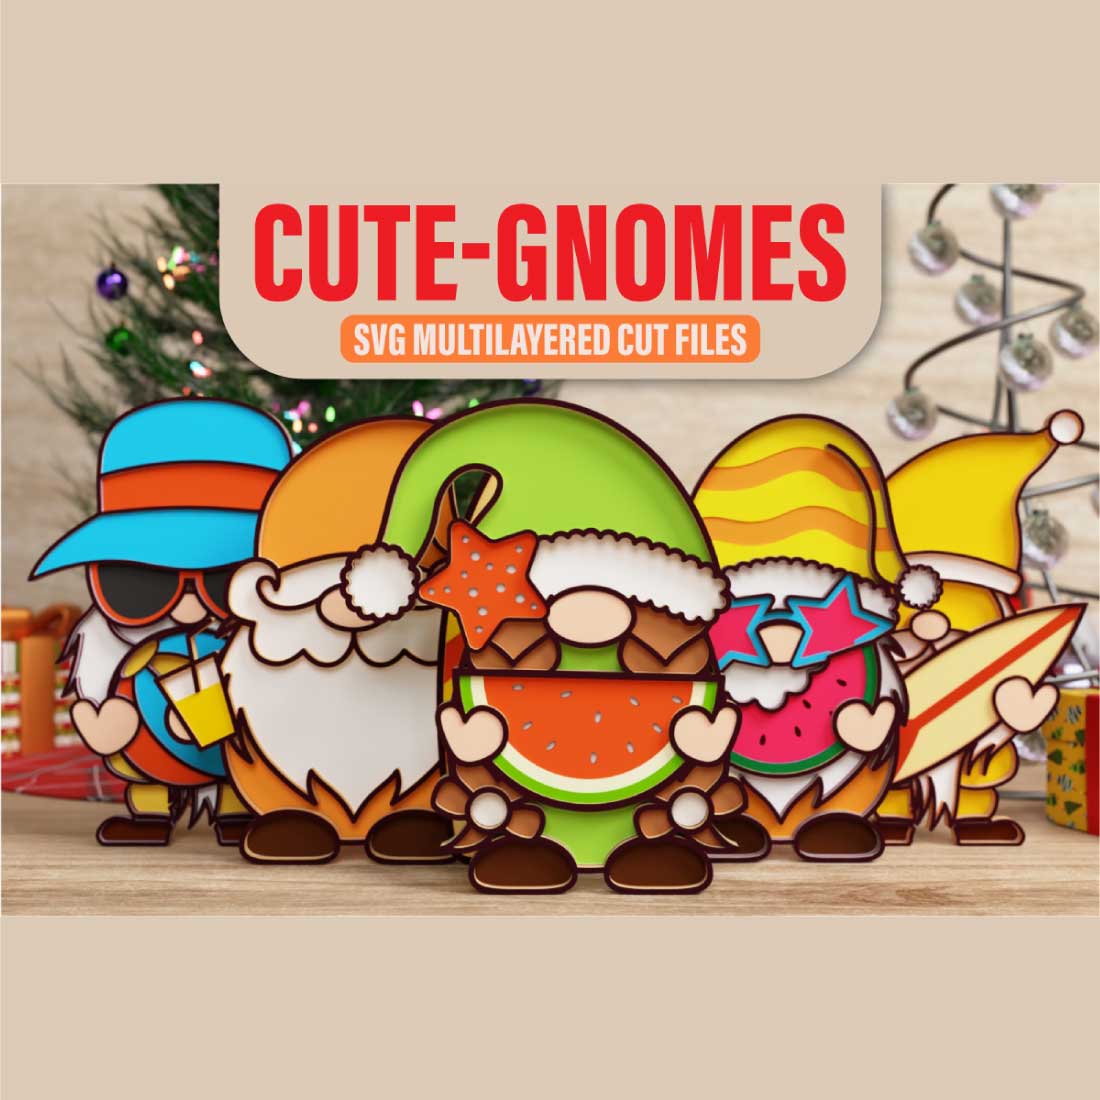 Summer Gnome 3D SVG Multilayered Cut Files cover image.